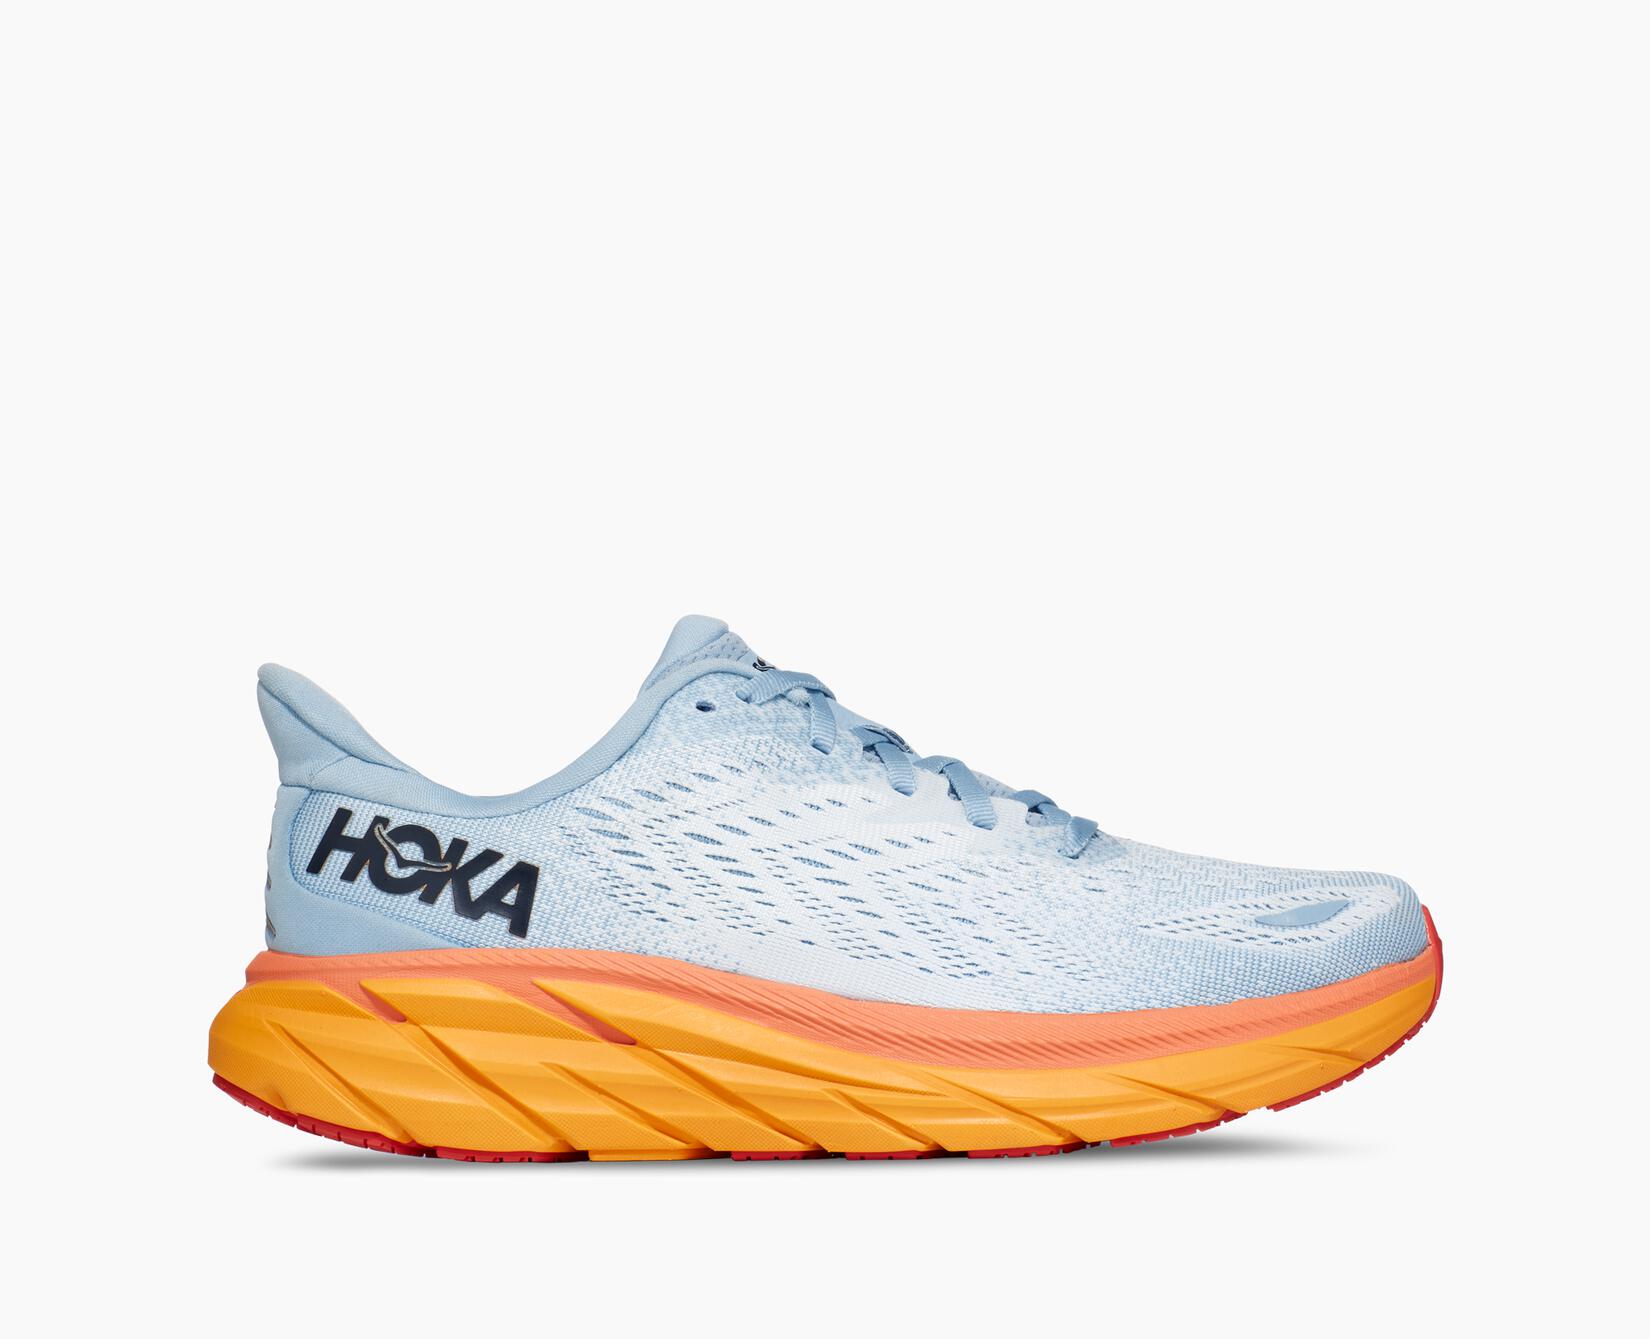 How Much Does Hoka Shoes Cost?